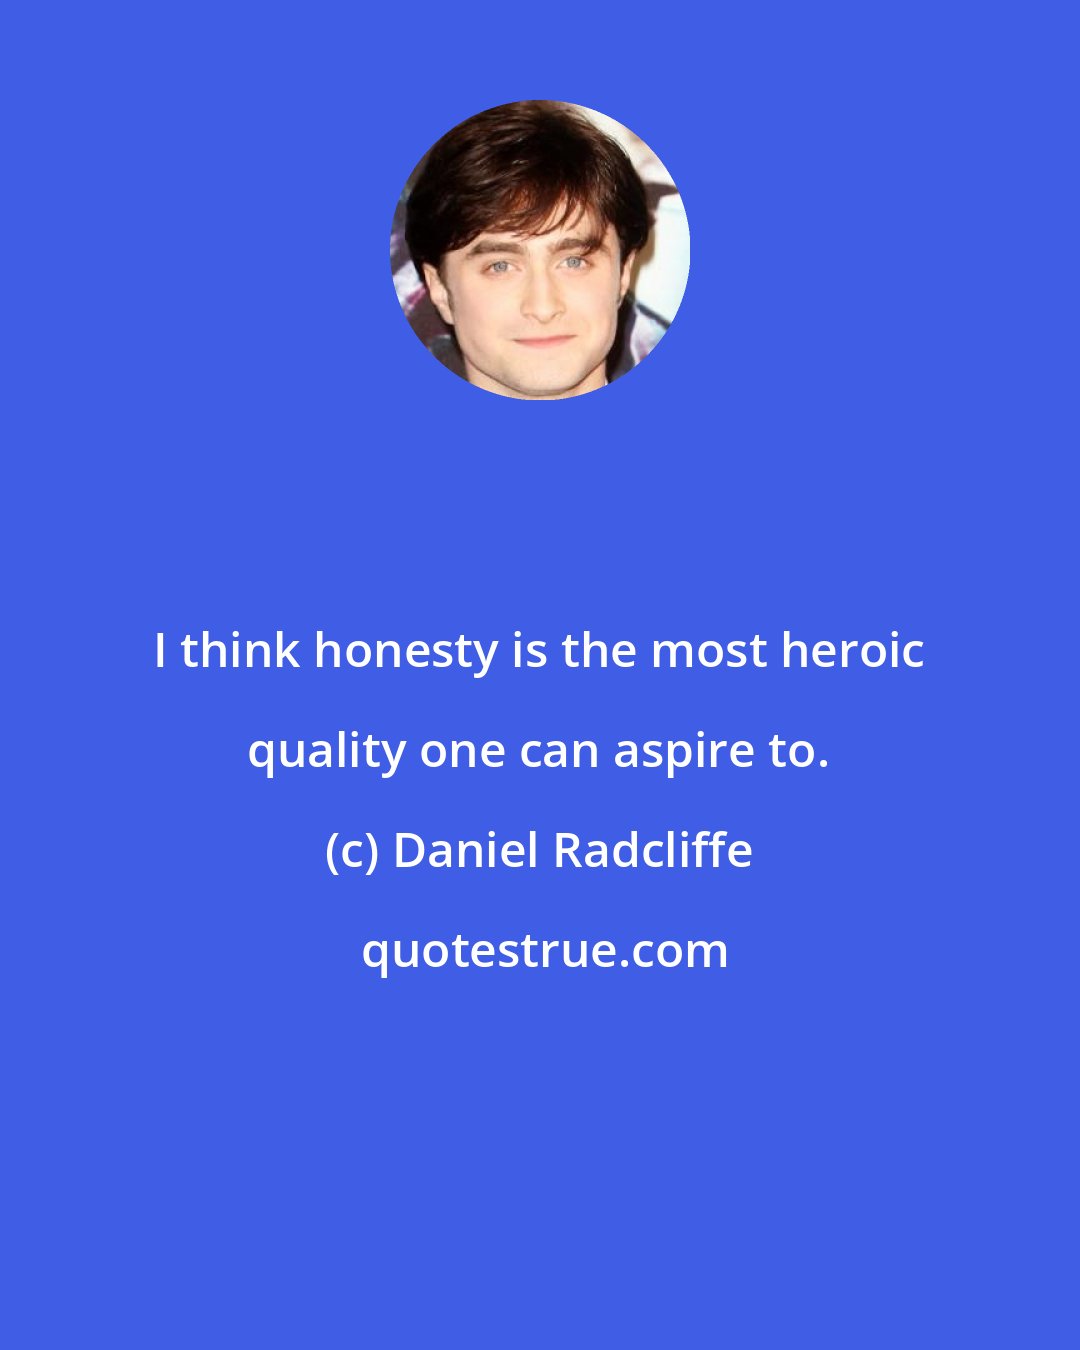 Daniel Radcliffe: I think honesty is the most heroic quality one can aspire to.